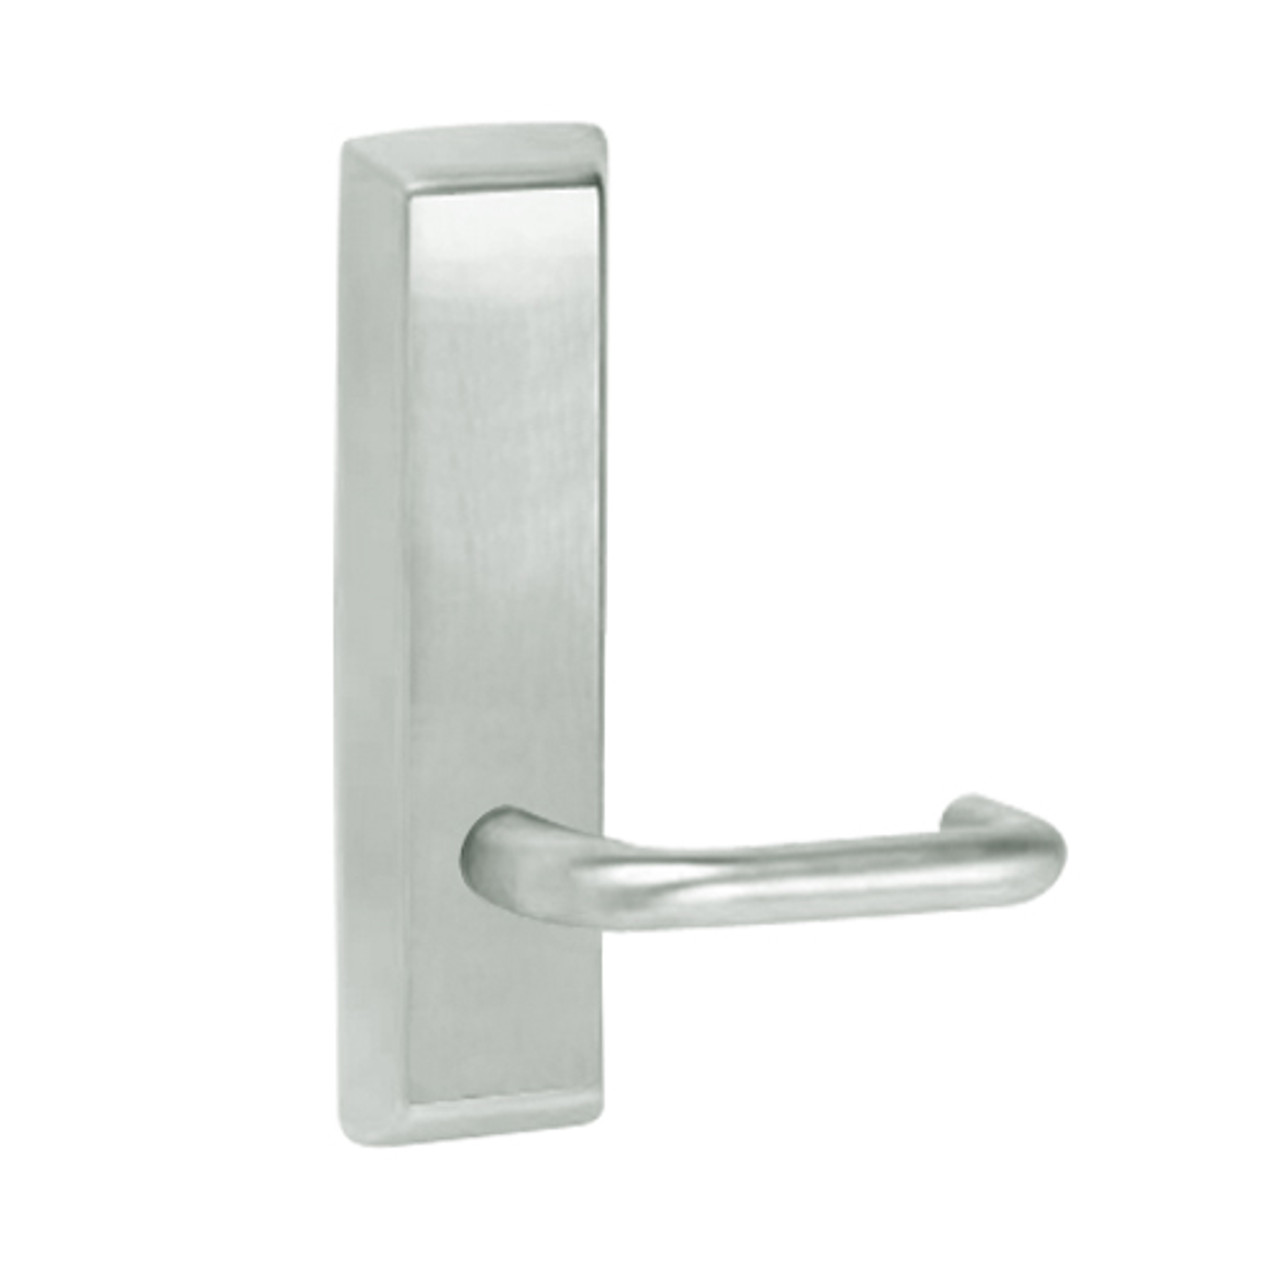 L955-618-RHR Corbin ED5000 Series Exit Device Trim with Classroom Lustra Lever in Bright Nickel Finish